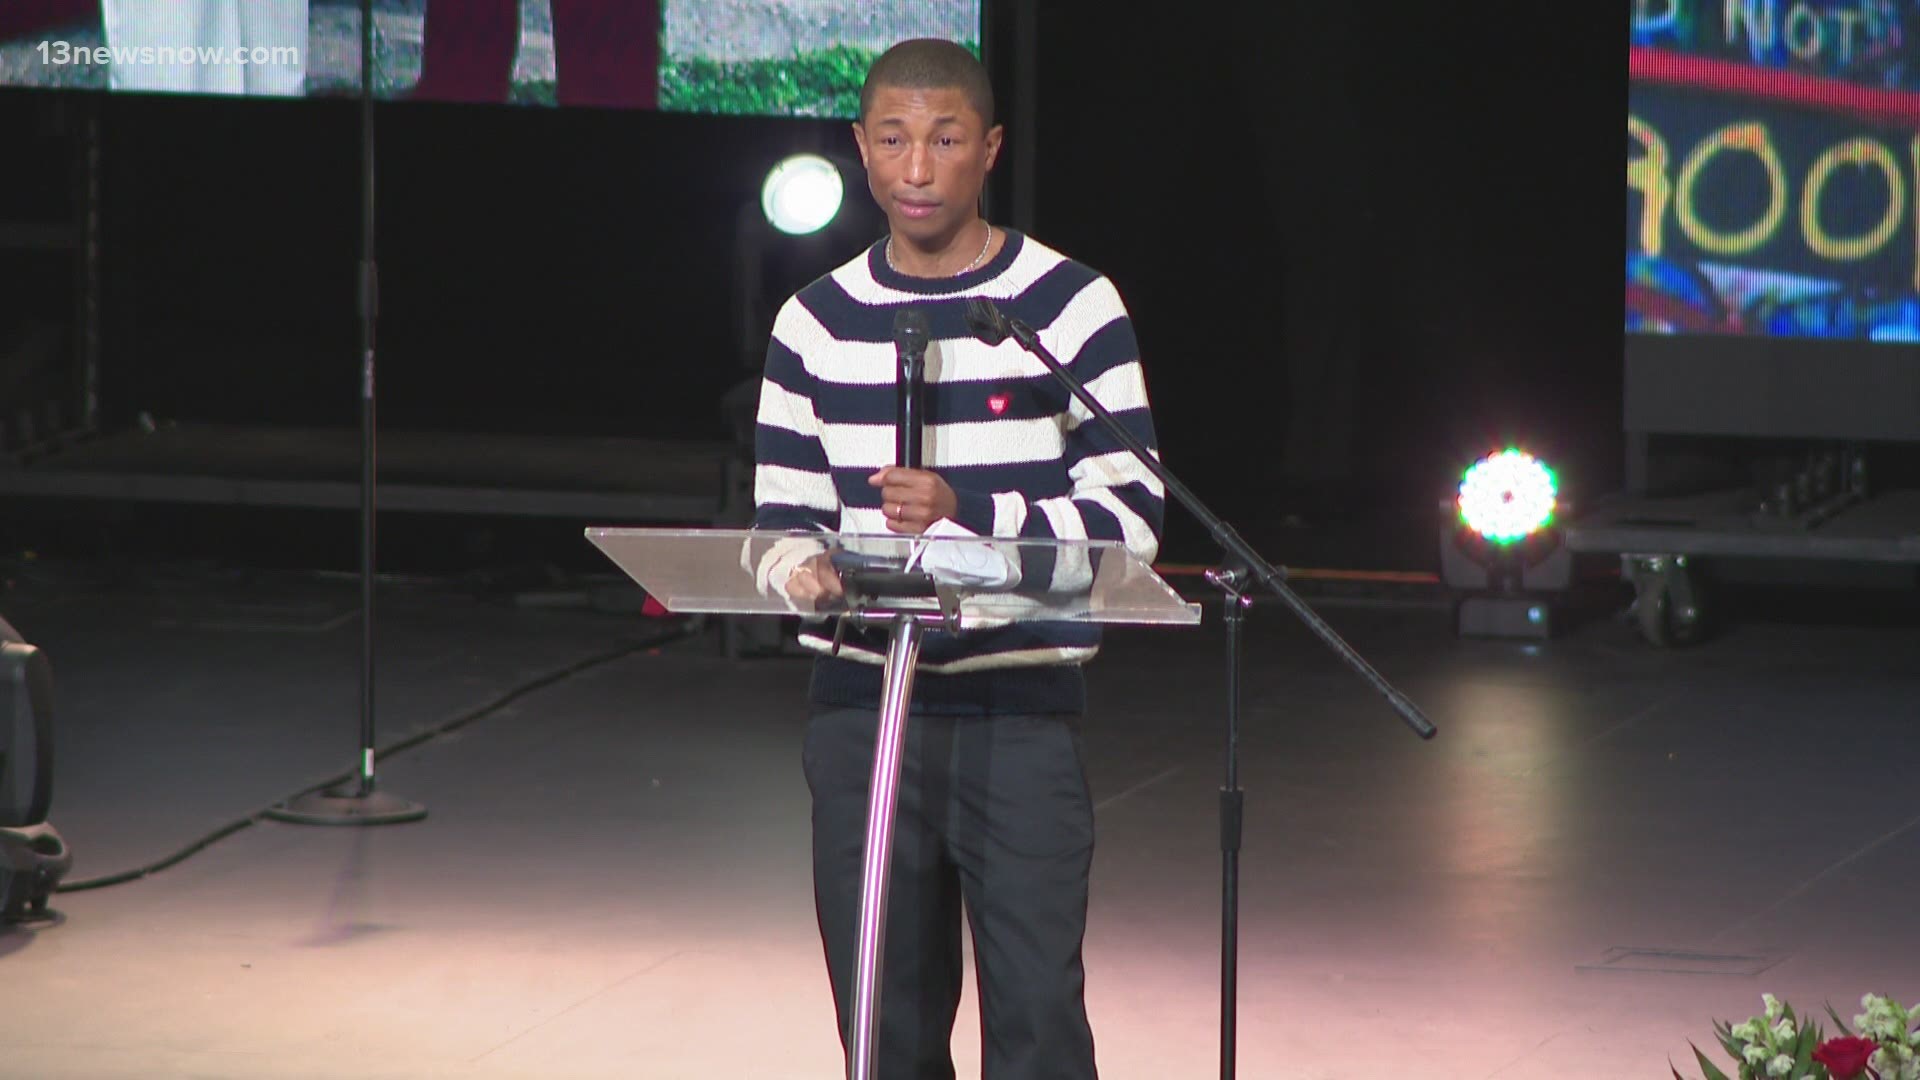 "Virginia Beach, you need to talk. Talk about your issues, talk about your struggles so we can get past them," Pharrell said at his cousin's funeral.